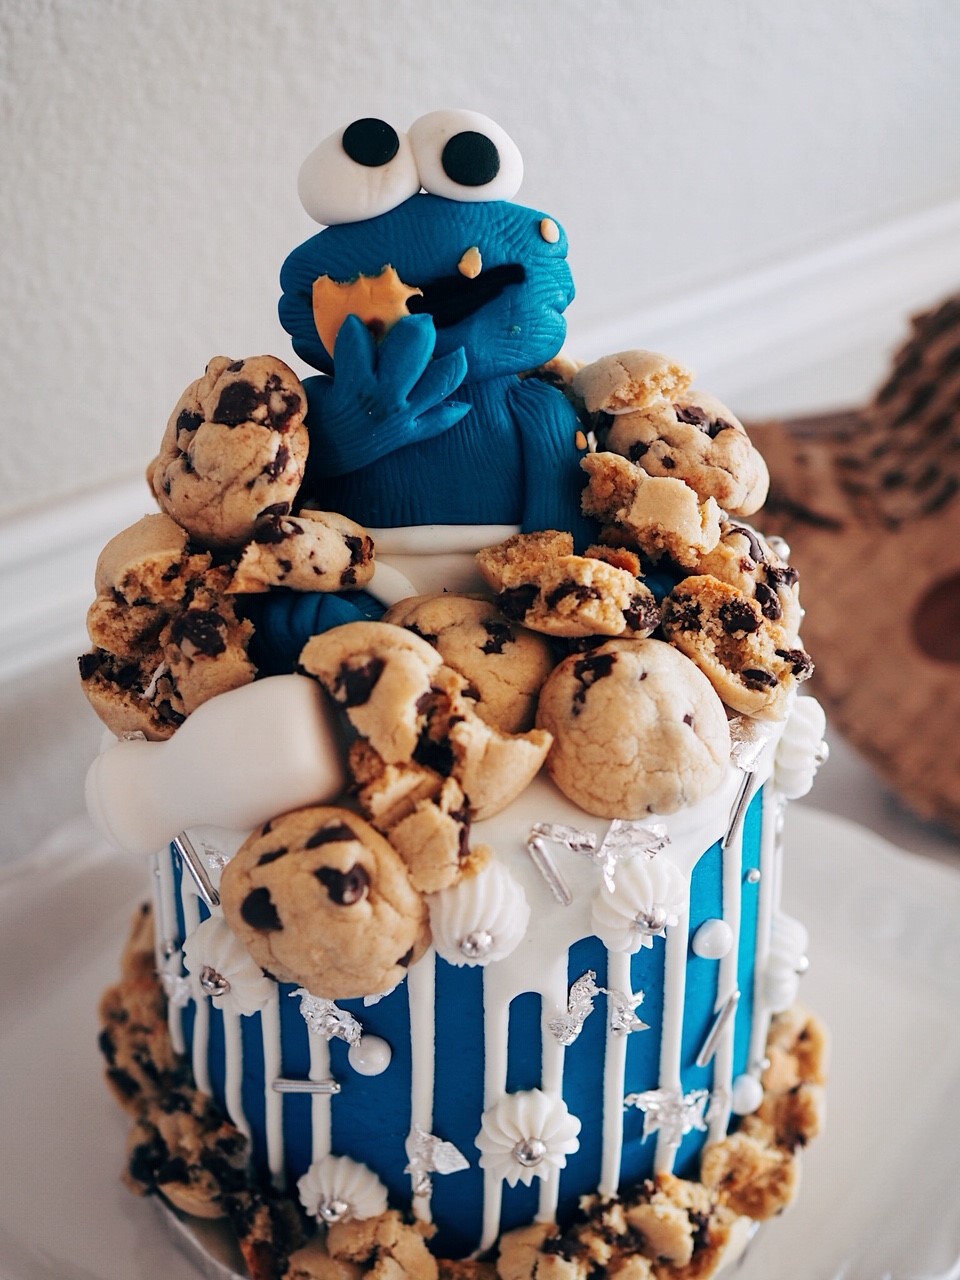 Cookie monster cake. – Chefjhoanes